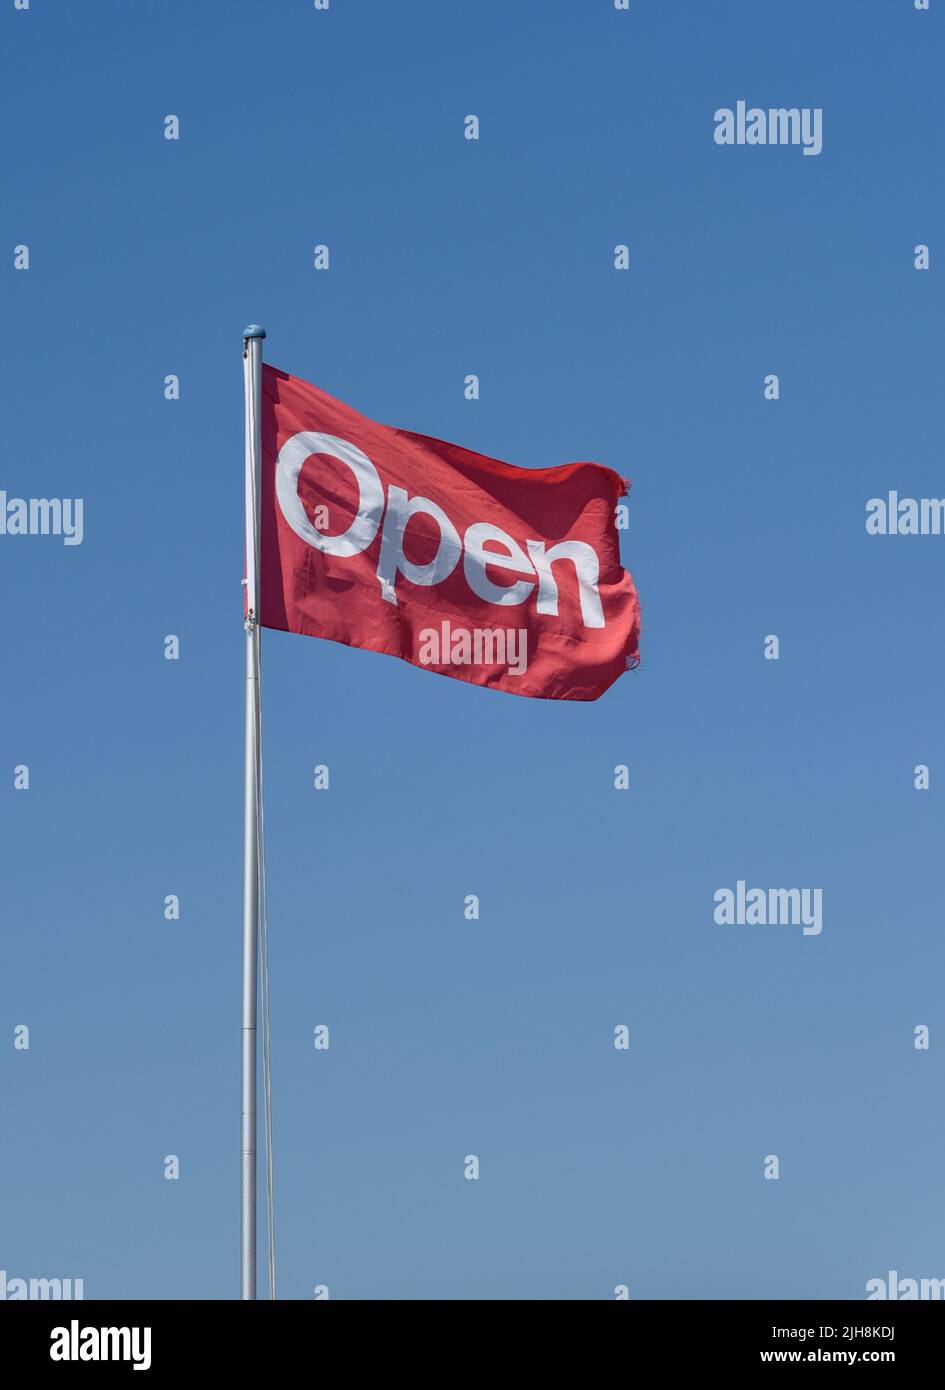 Open sign, red flag with white writing fluttering against a plain blue sky. Stock Photo